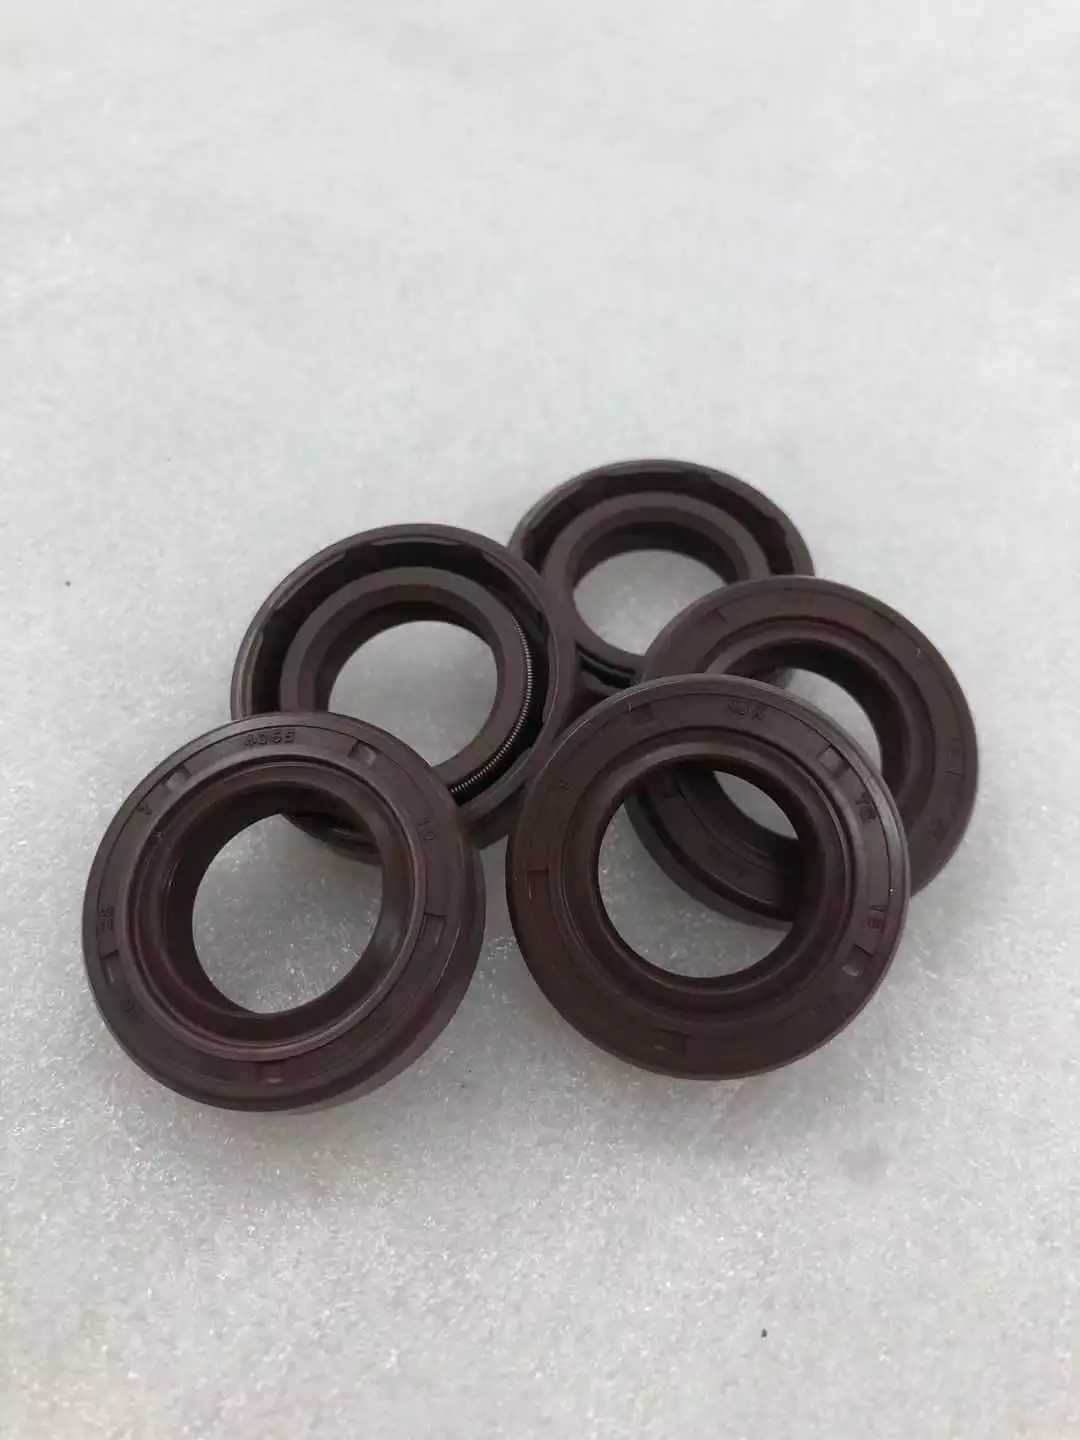 oil seal Hot sale High quality engine parts 125 foot shift arm oil seal Factory supply DAYANG tricycle parts perfect performance